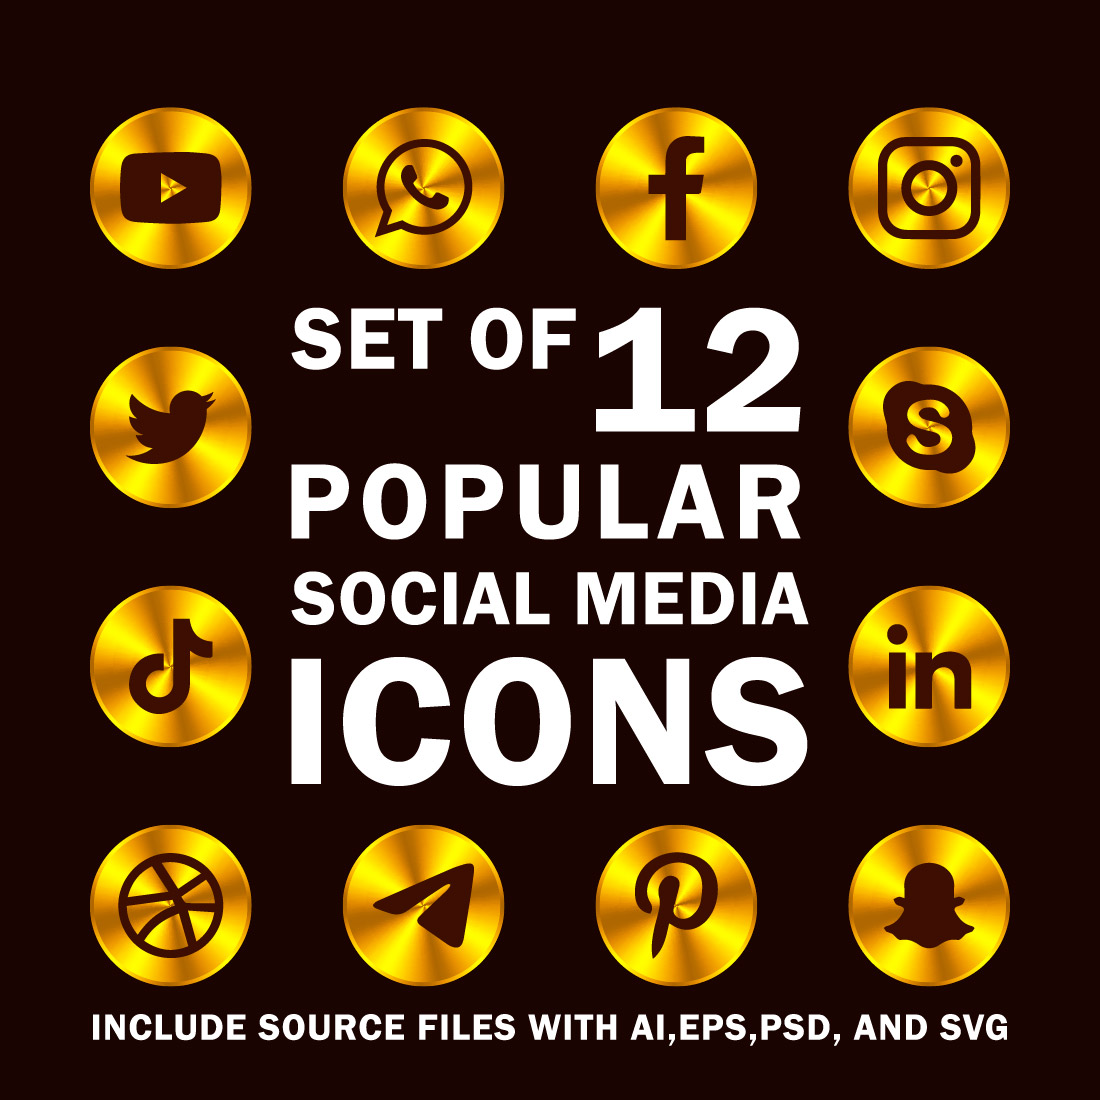 Set of 12 Popular Social Media Icons Luxury Golden Circles cover image.